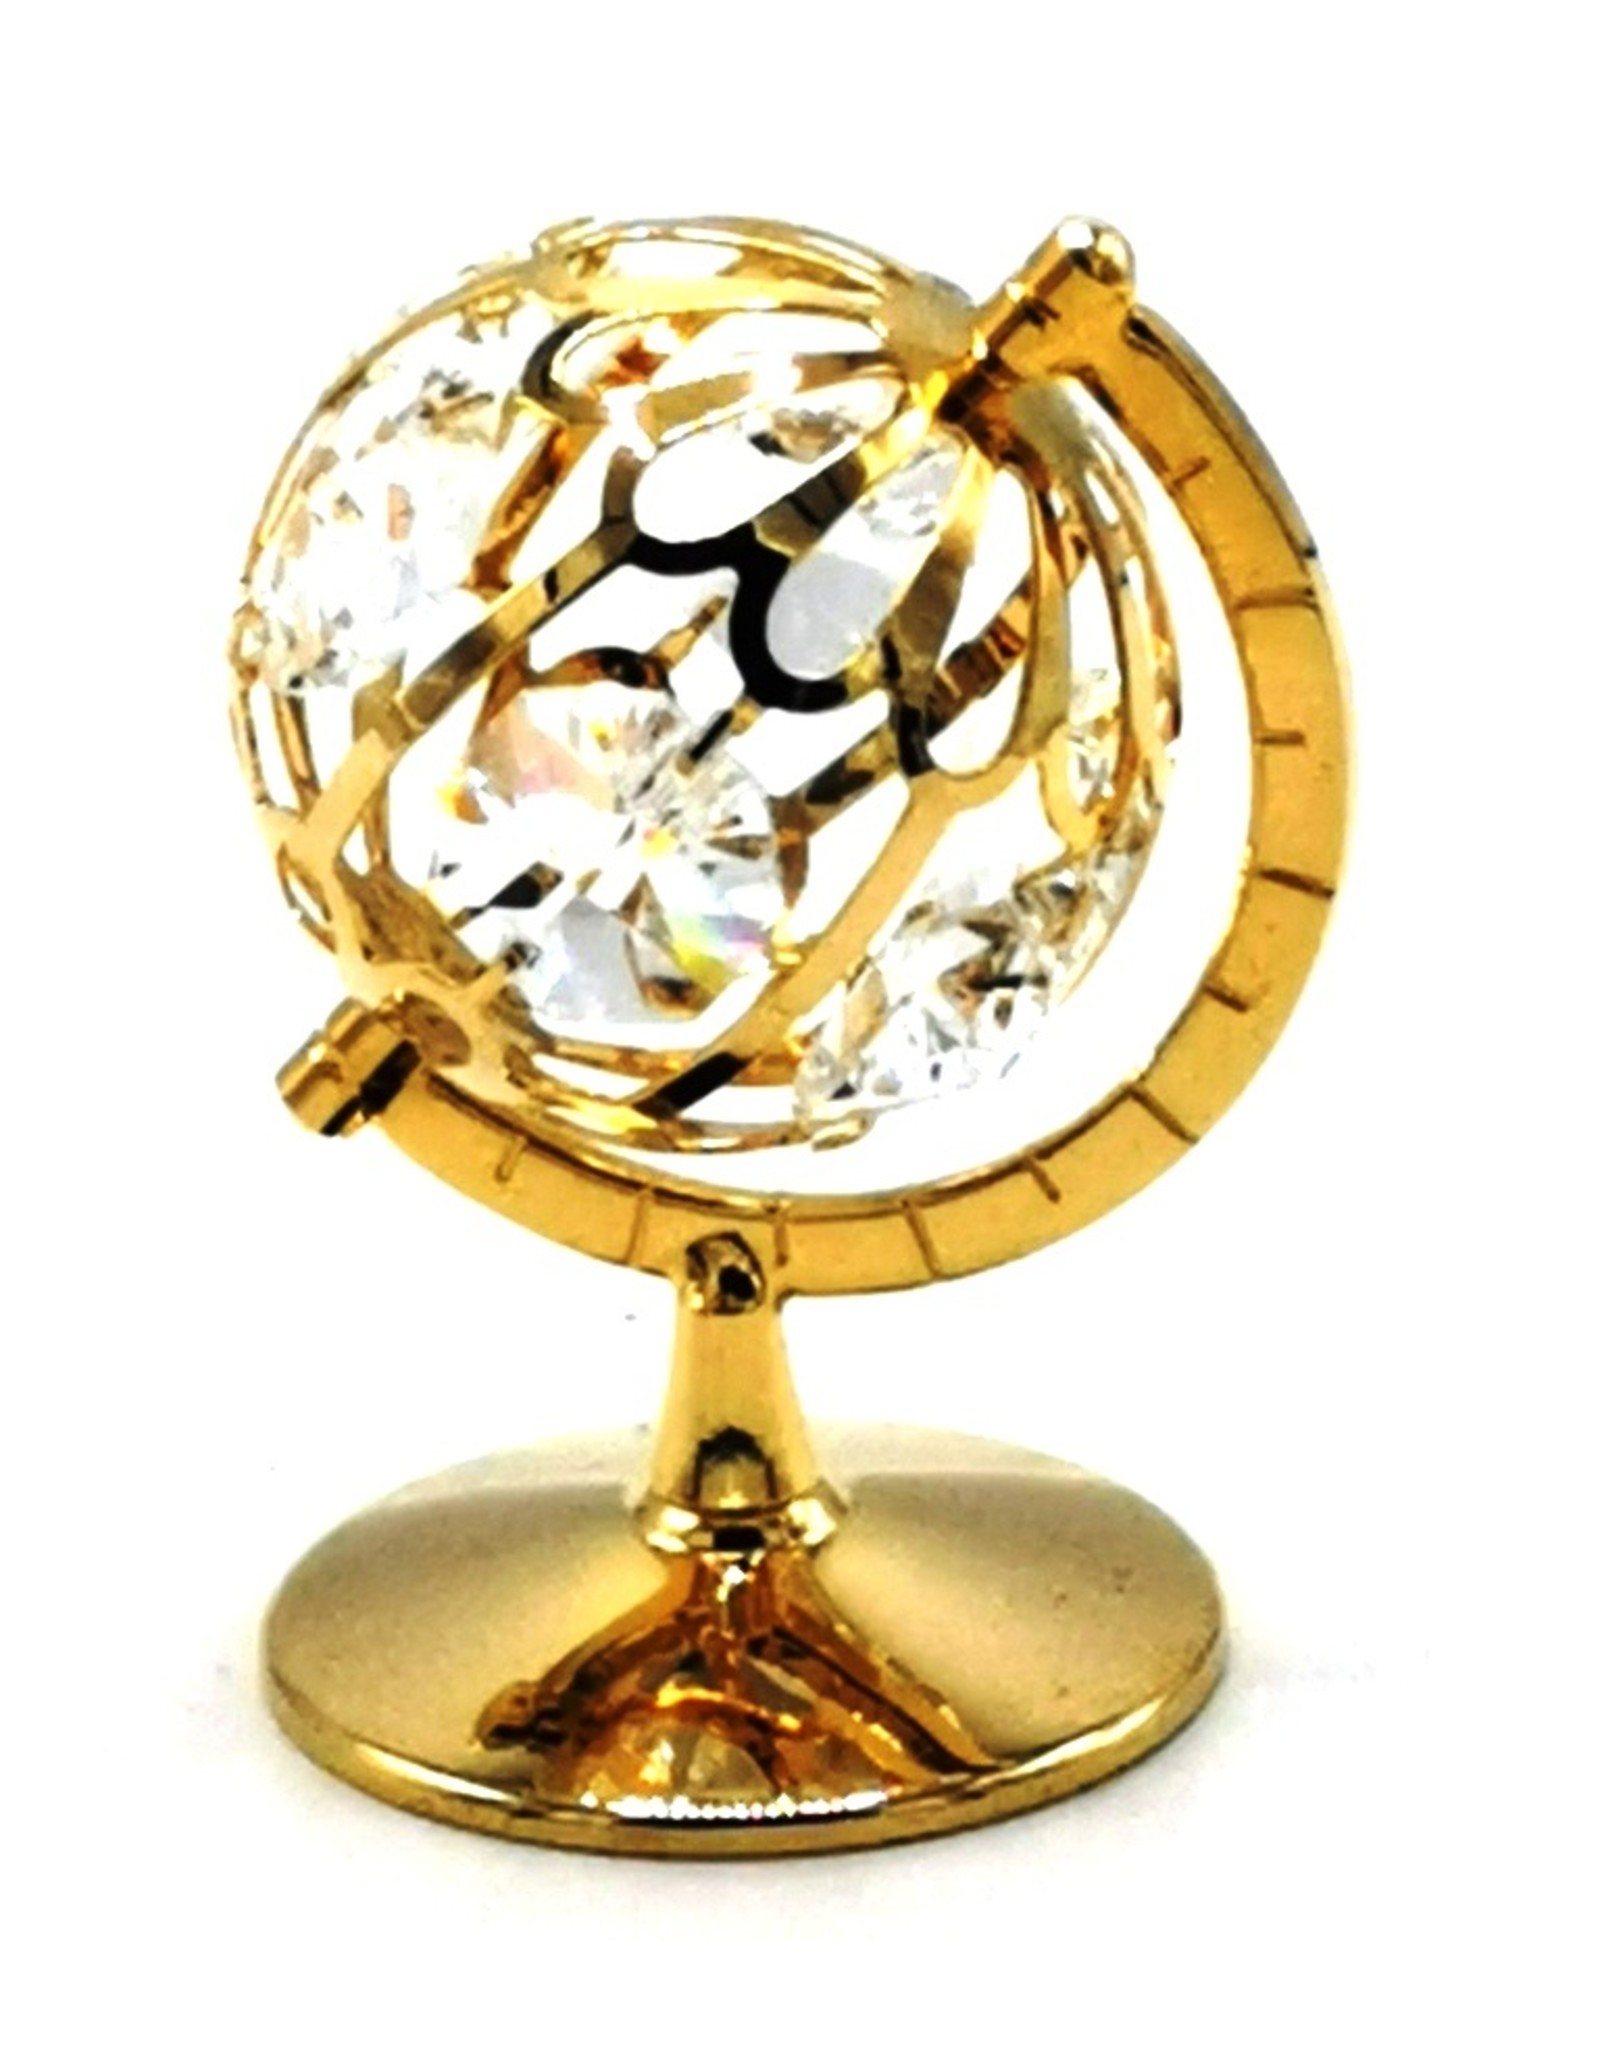 Crystal Temptations Miscellaneous - Miniature globe - gold-plated and with Swarovski